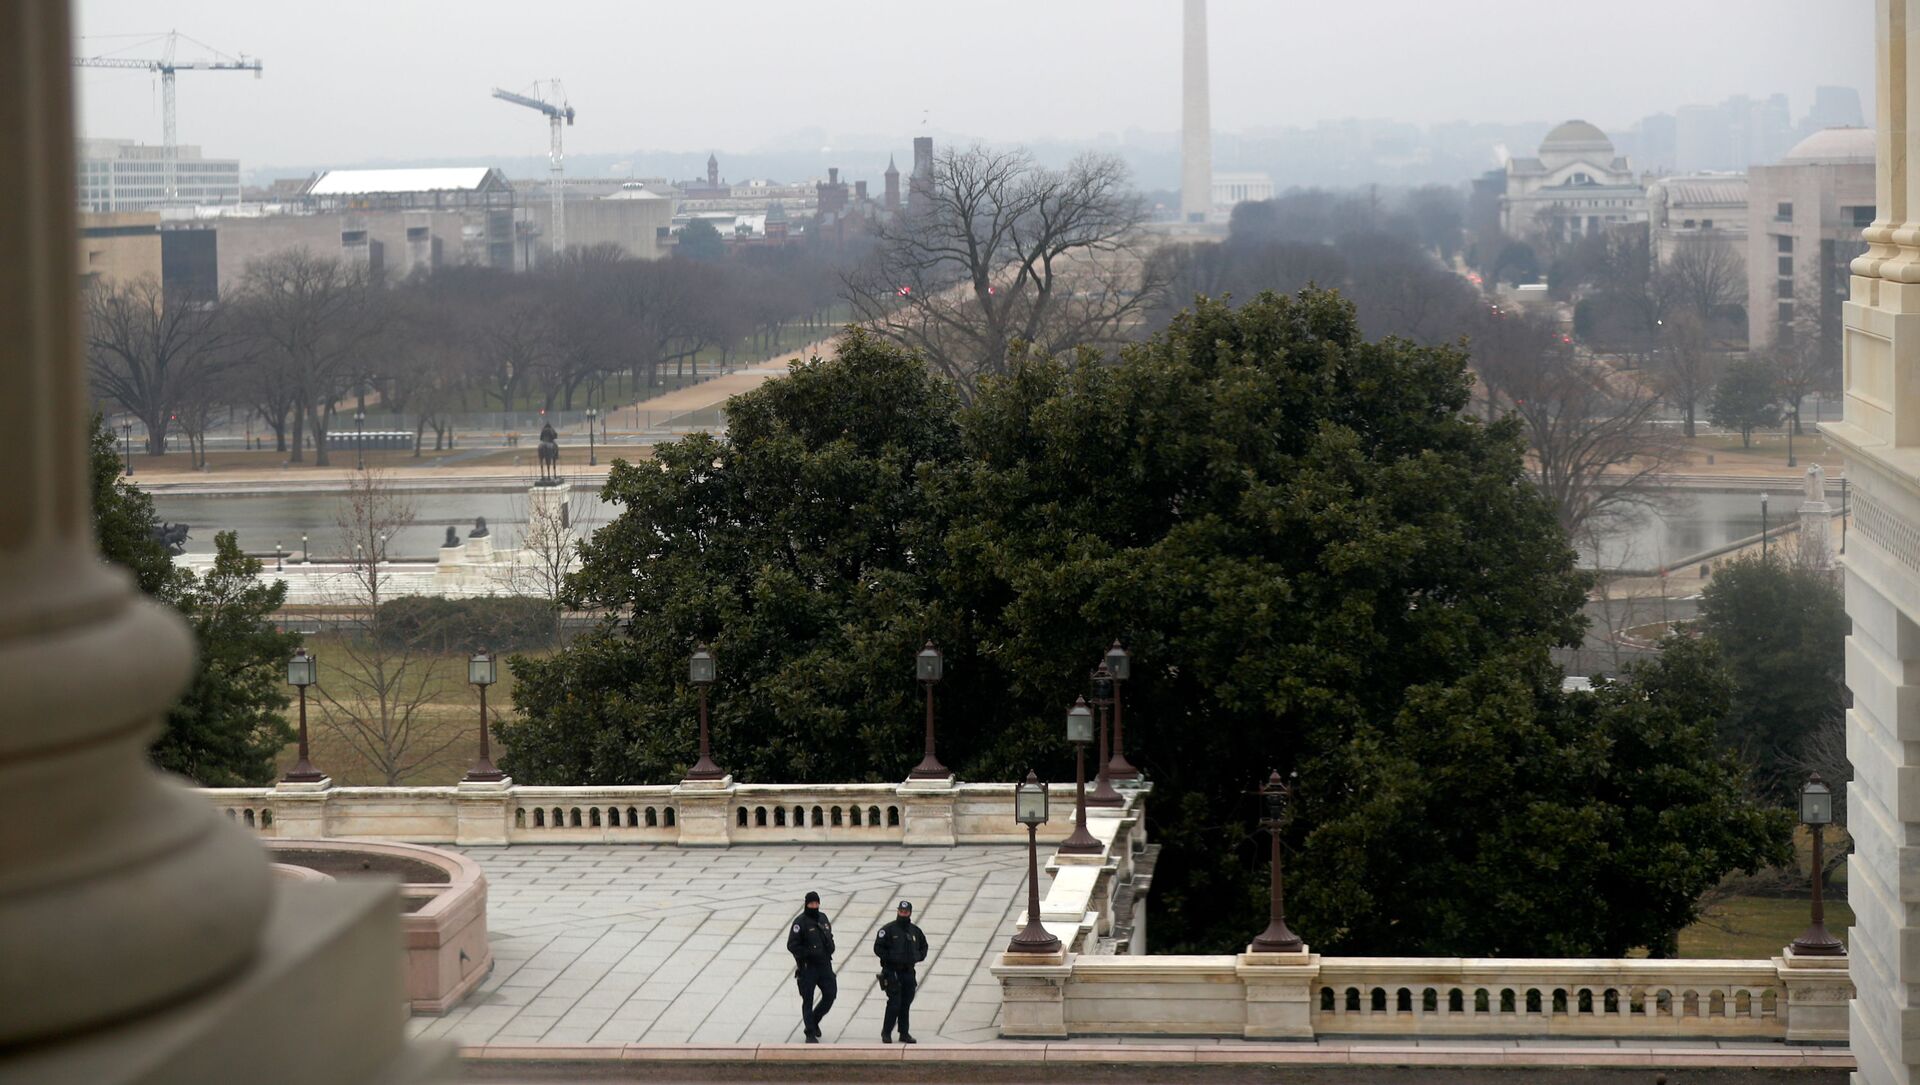 U.S. Capitol officers walk during the third day of senate impeachment hearings against former U.S. President Donald Trump, at the U.S. Capitol - Sputnik International, 1920, 12.02.2021